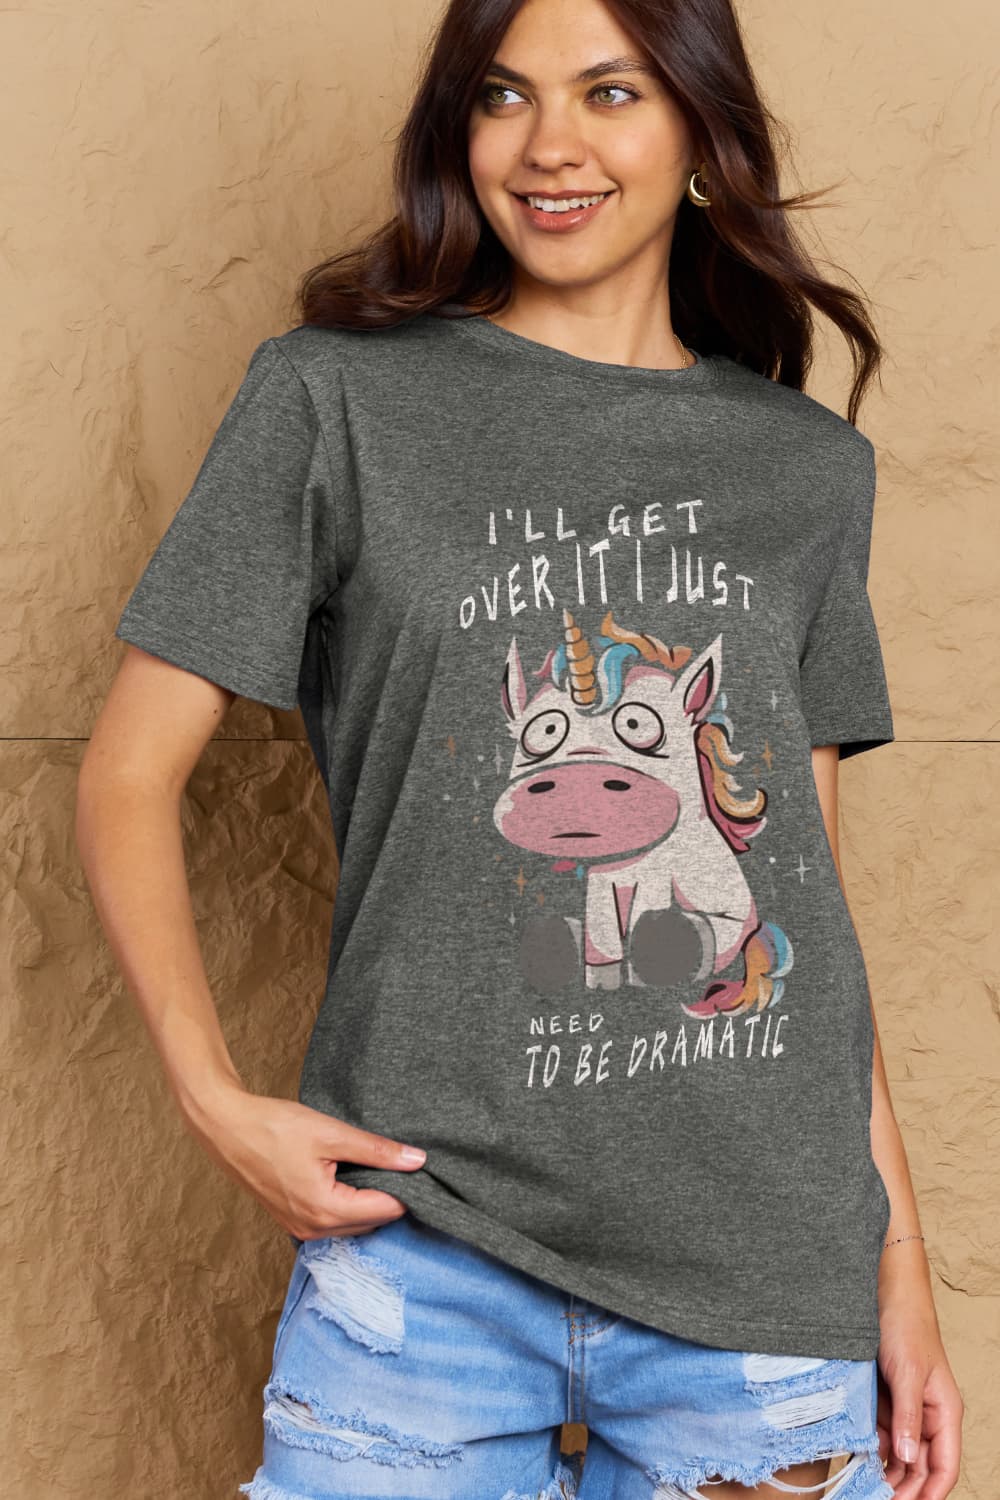 Full Size I'LL GET OVER IT I JUST NEED TO BE DRAMATIC Graphic Cotton Tee